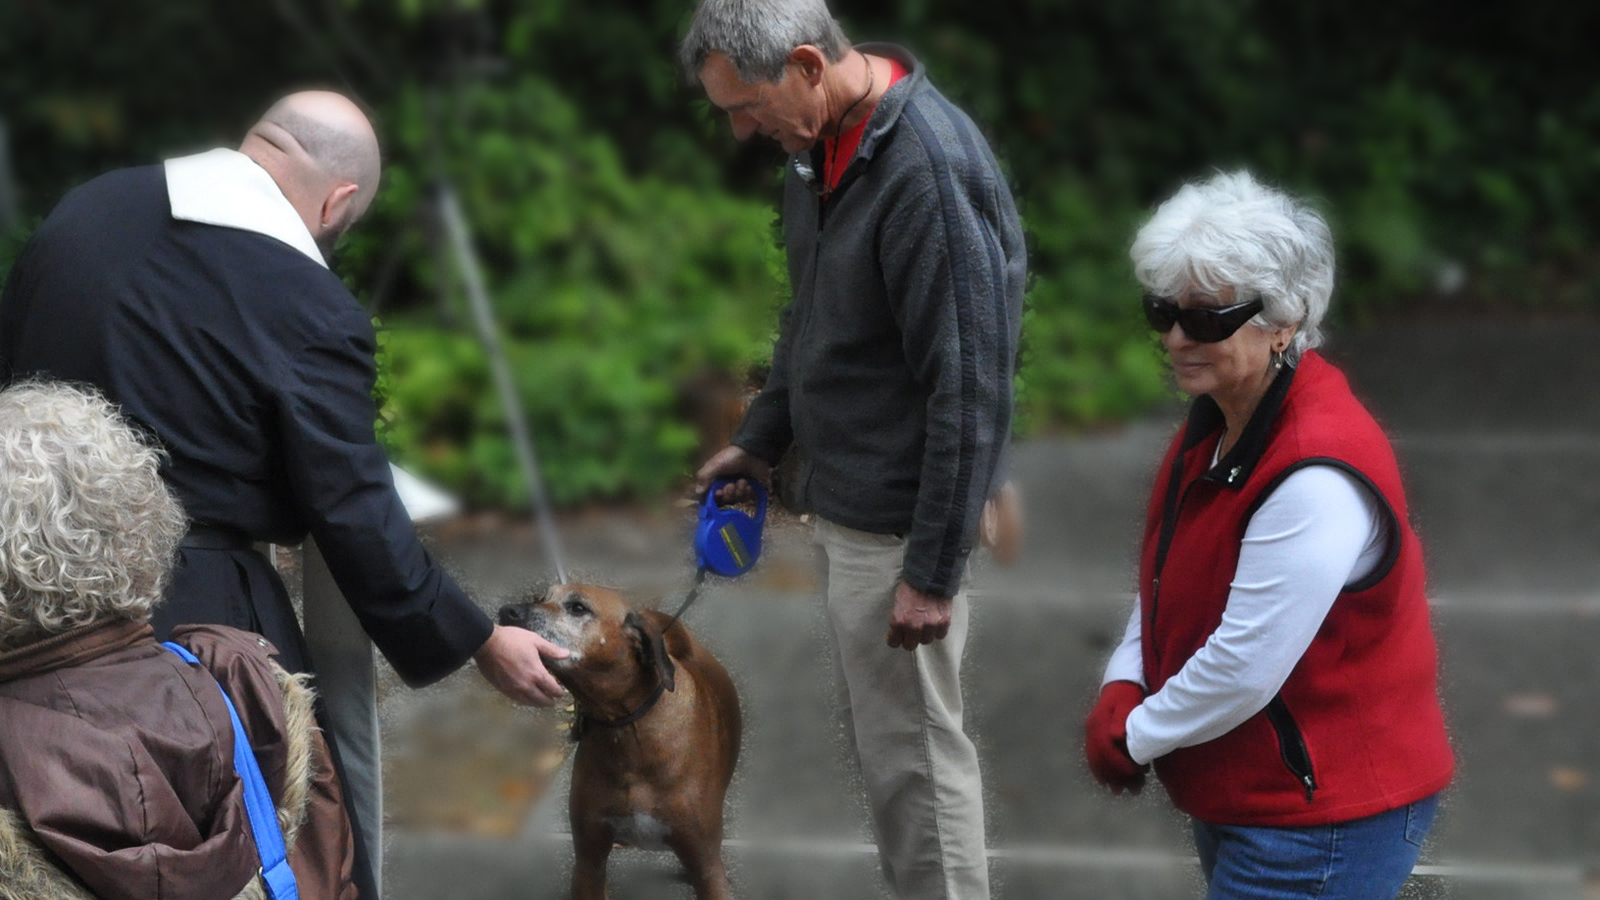 Father Jed blessing a dog at the Church of the Redeemer campus.